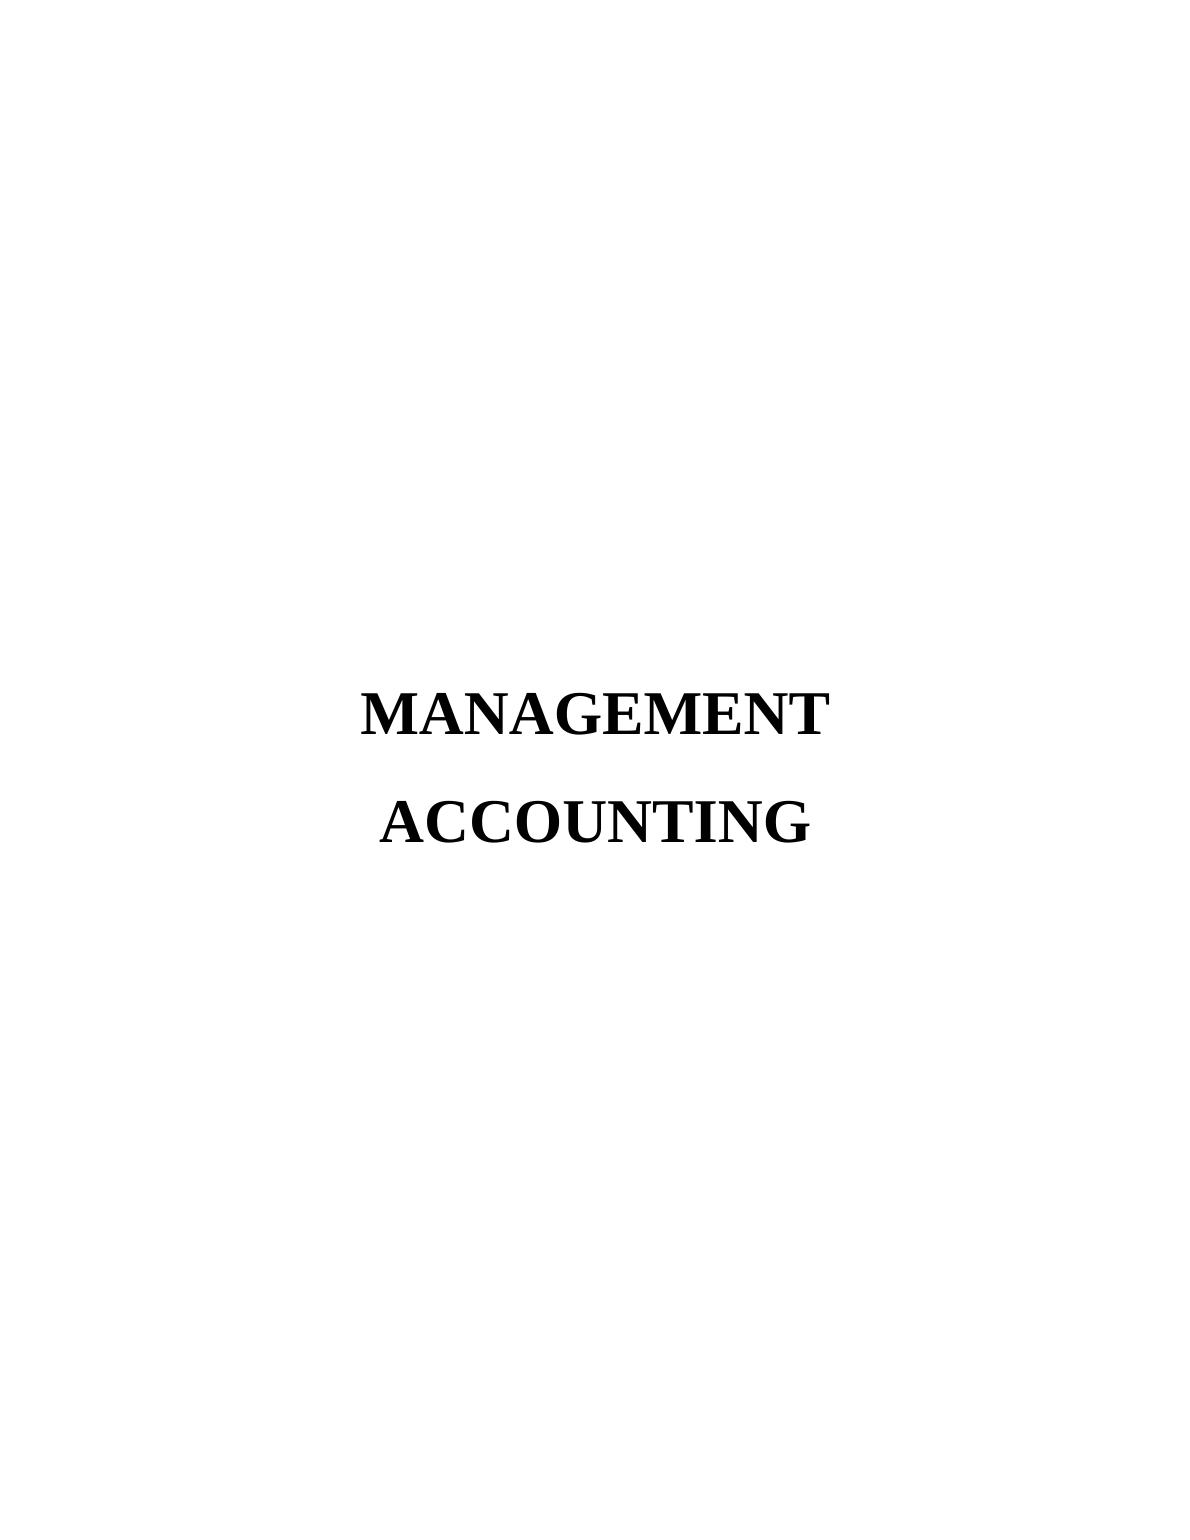 Various Administration Accounting Schemes for Fund Control_1